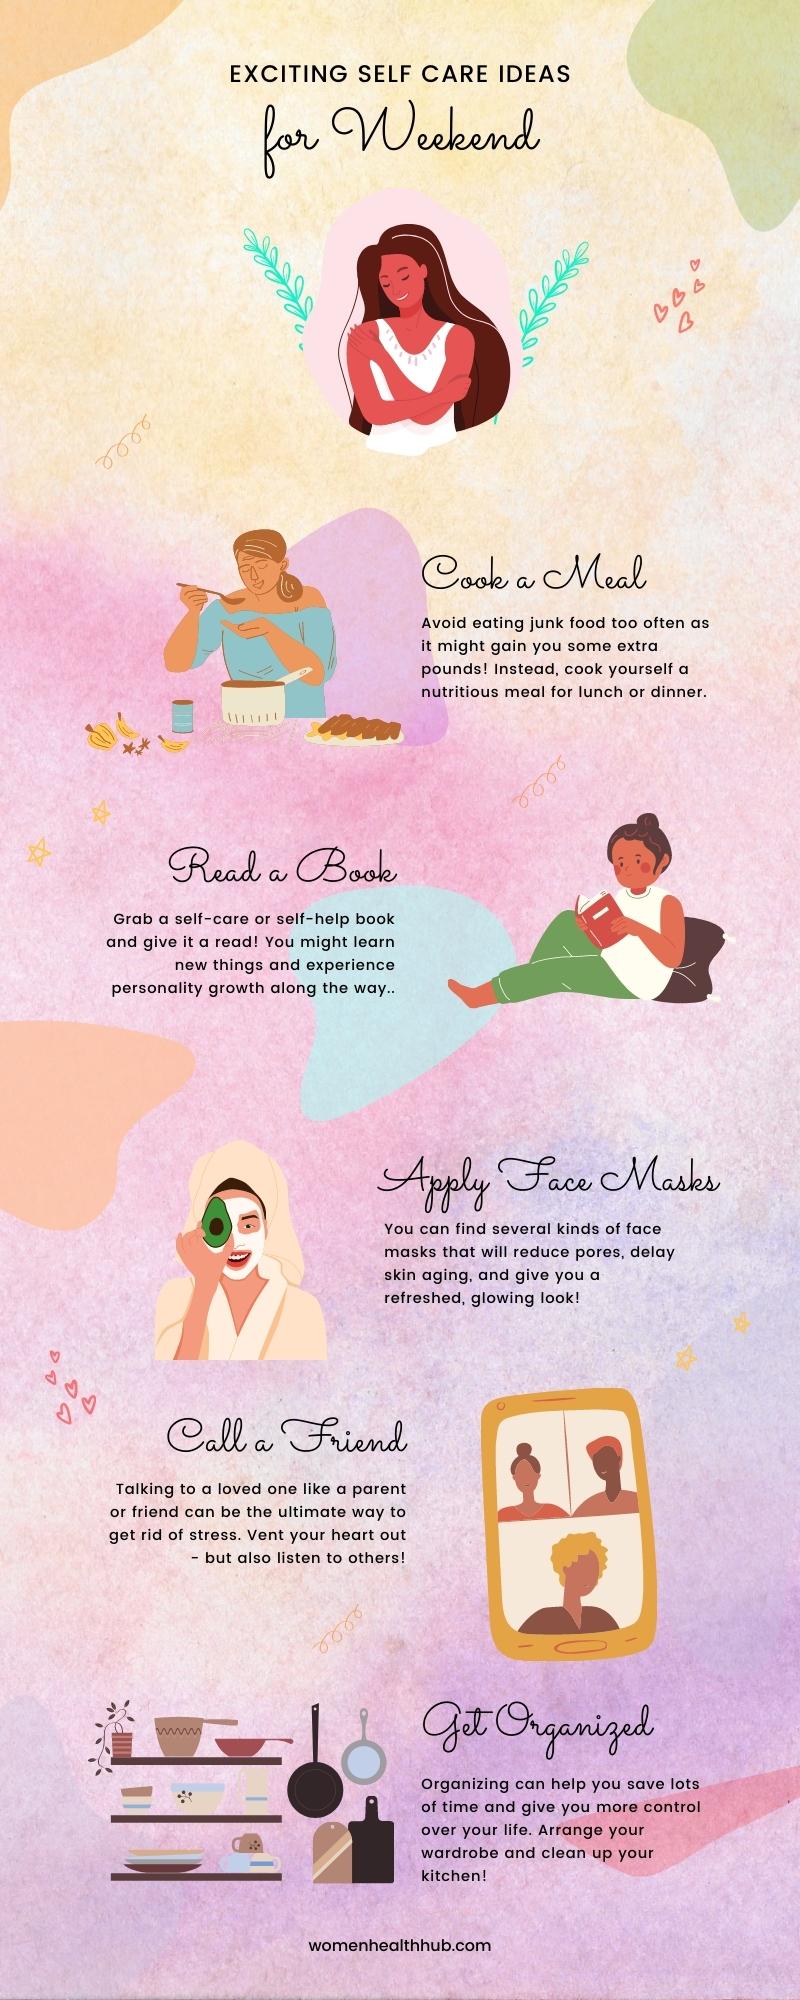 Sunday self-care routine ideas for night and day - Women Health Hub